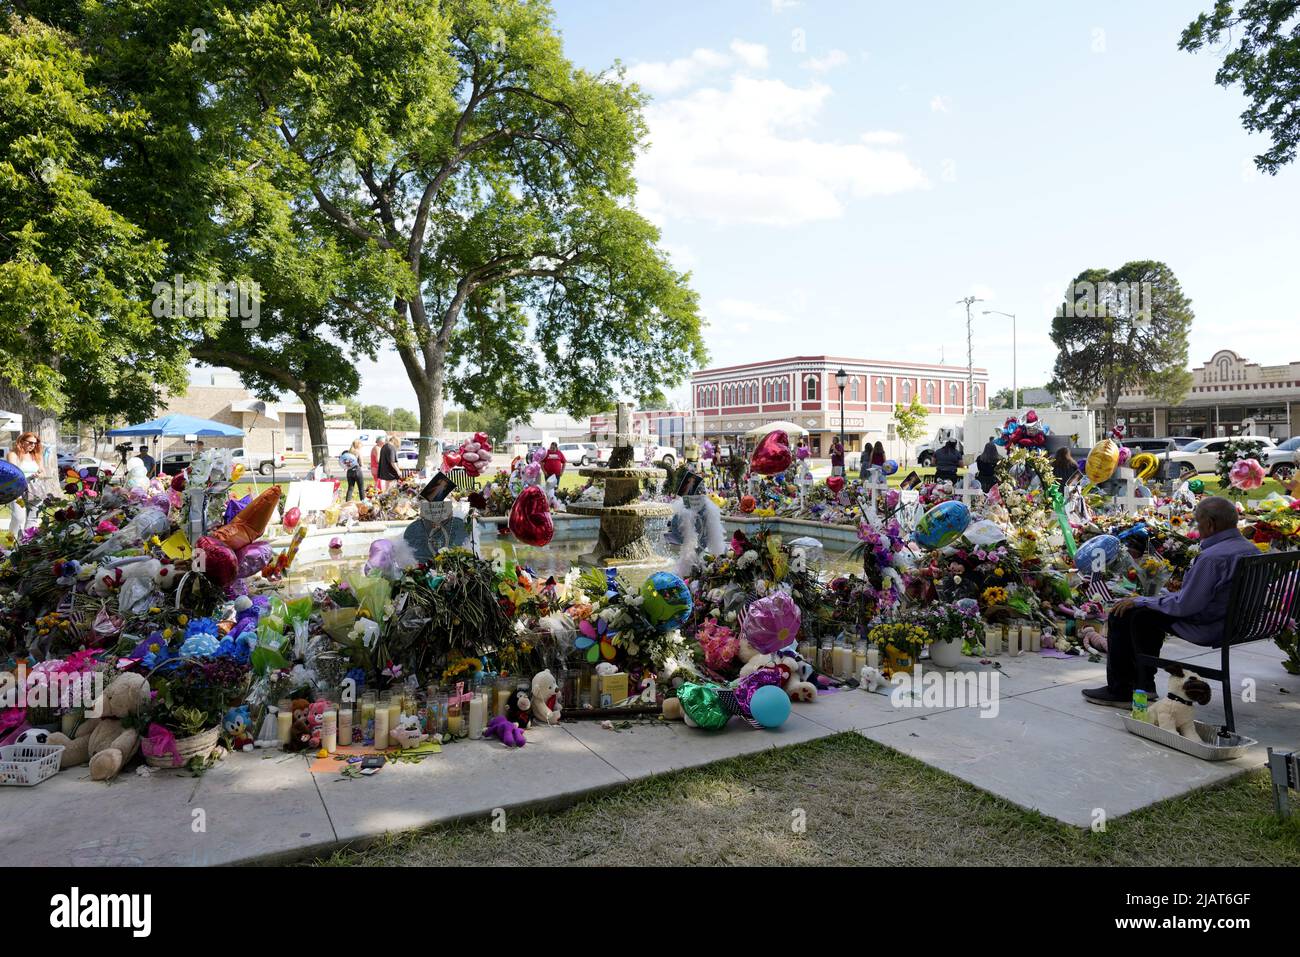 Uvalde, USA. 31st May, 2022. People mourn for victims of a school mass shooting at Town Square in Uvalde, Texas, the United States, May 31, 2022. At least 19 children and two adults were killed in a shooting at Robb Elementary School in the town of Uvalde, Texas, on May 24. Credit: Wu Xiaoling/Xinhua/Alamy Live News Stock Photo